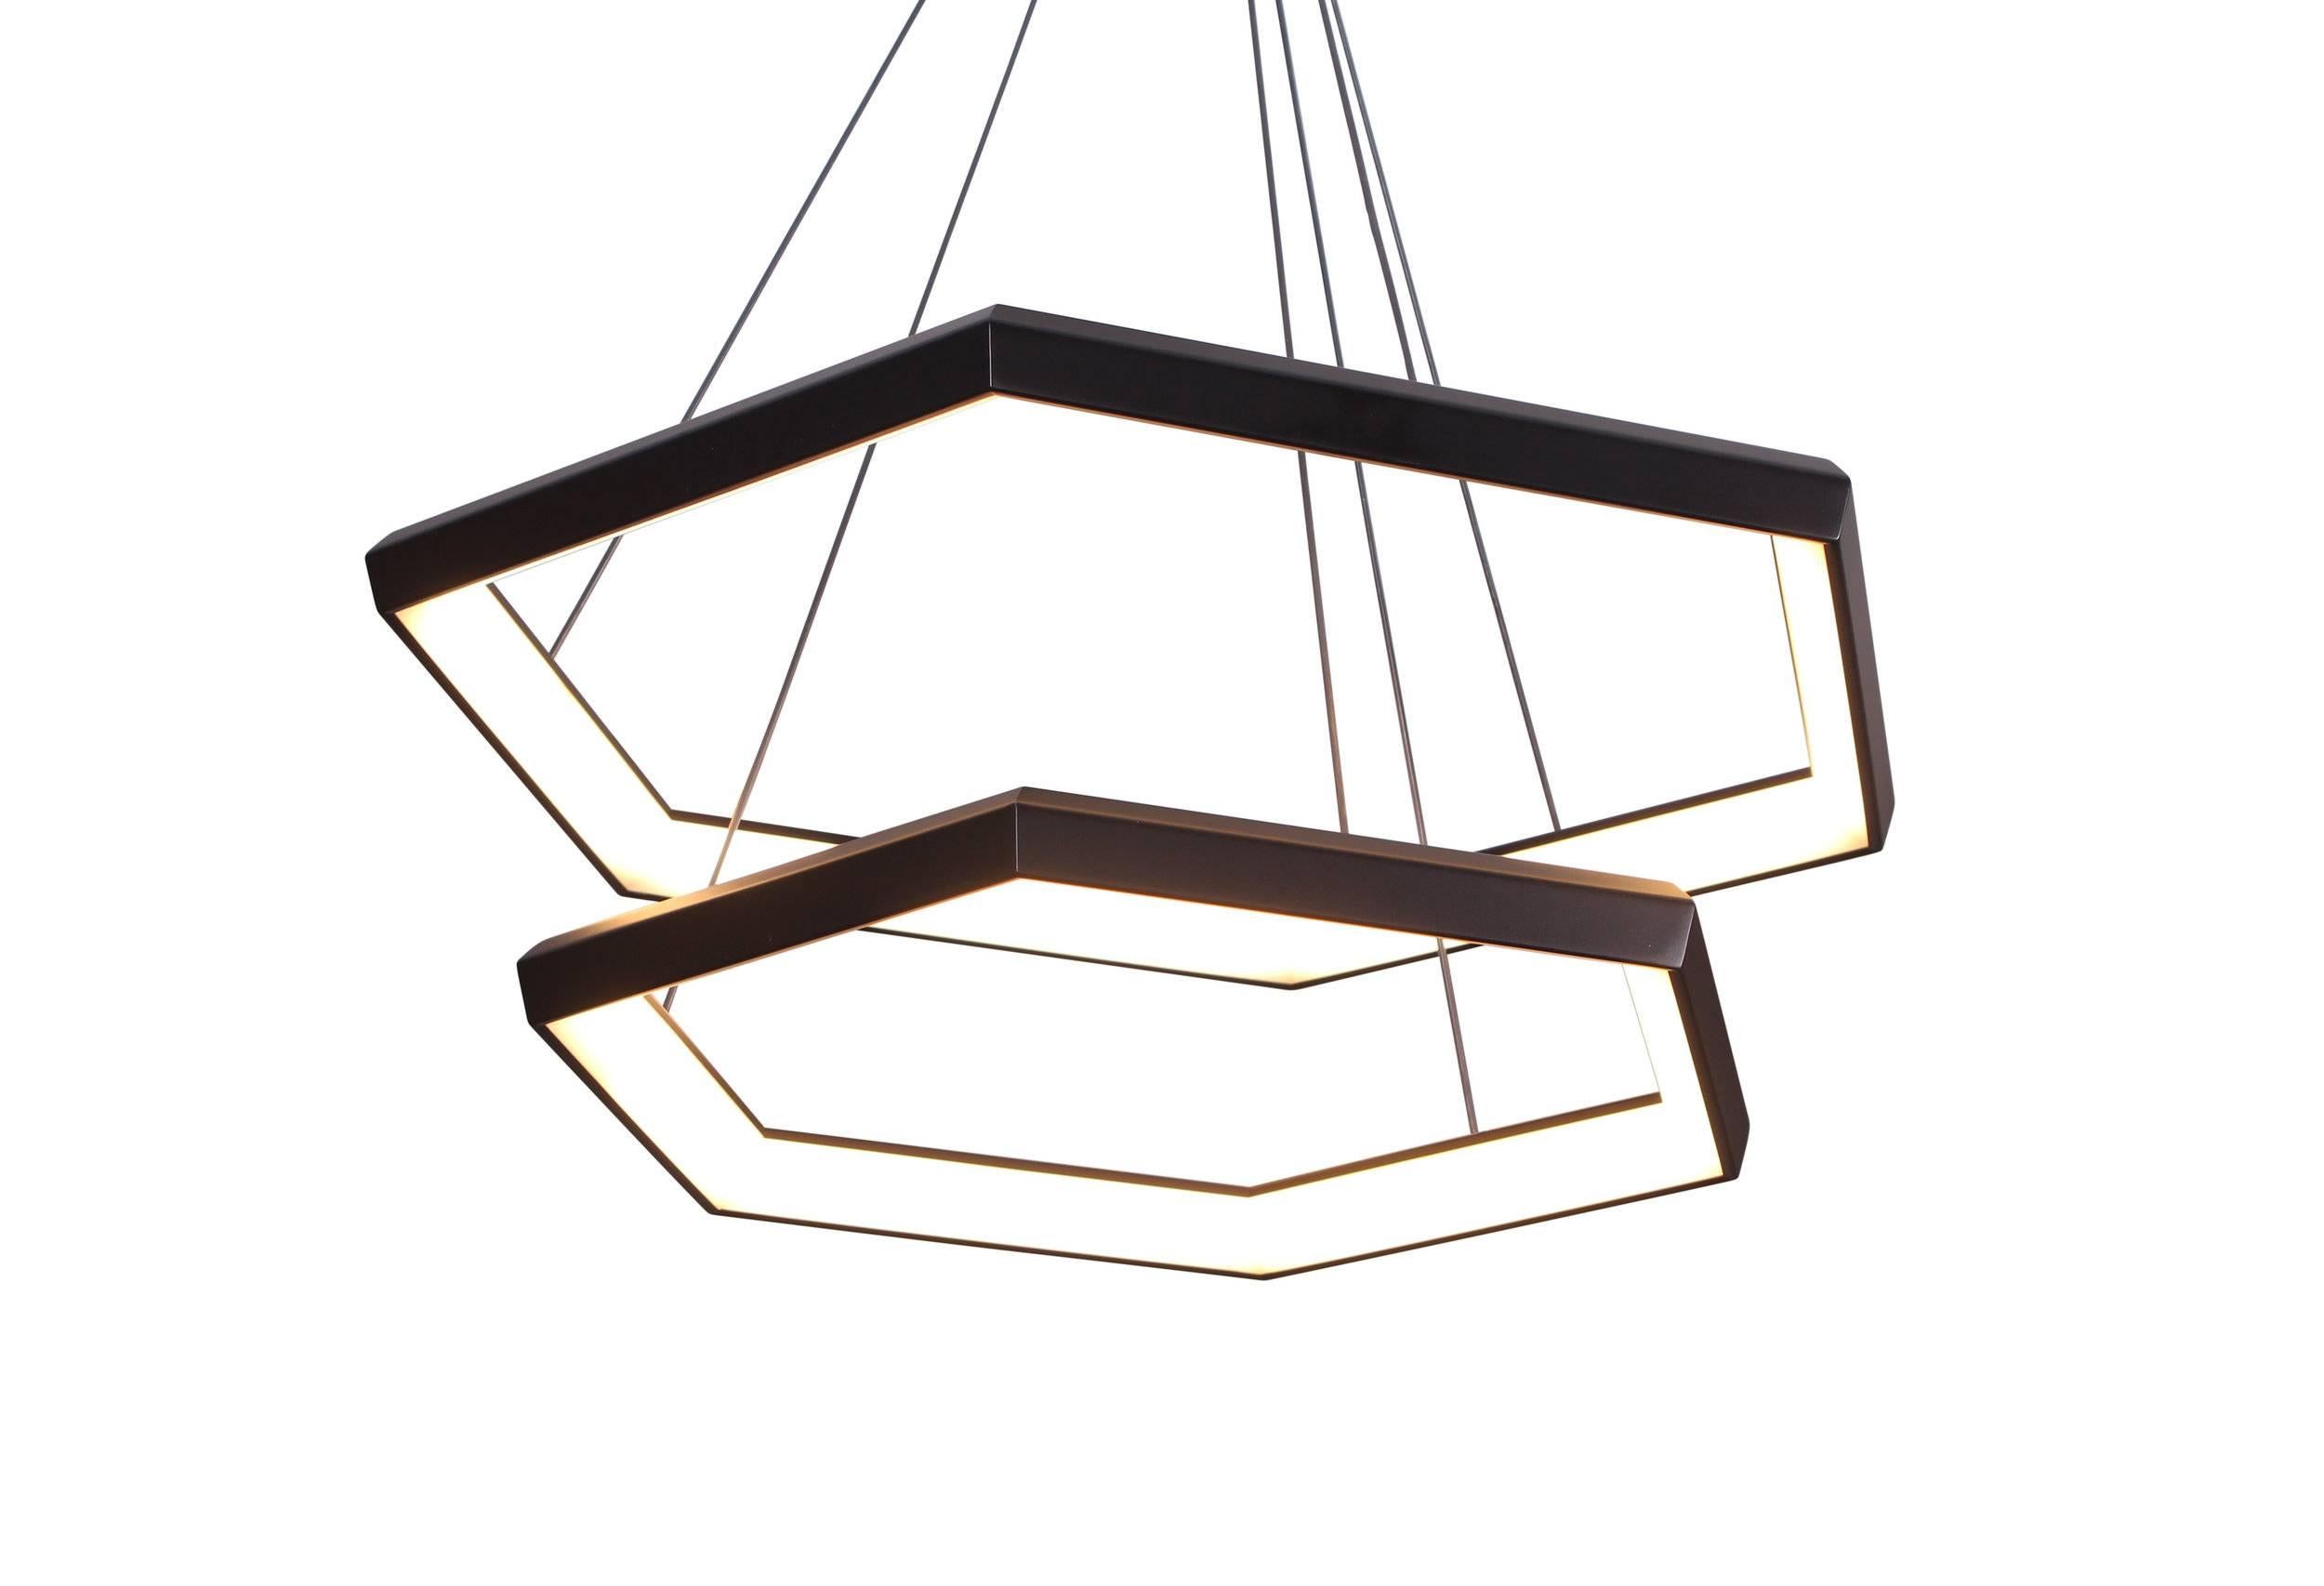 HEXIA CASCADE HXC28 is a streamlined and versatile line featuring the simple and balanced geometry of a convex hexagon. This fixture is composed of one HEXIA tier effortlessly suspended above the other. 

Metal Finish 
Powder-coat finishes available